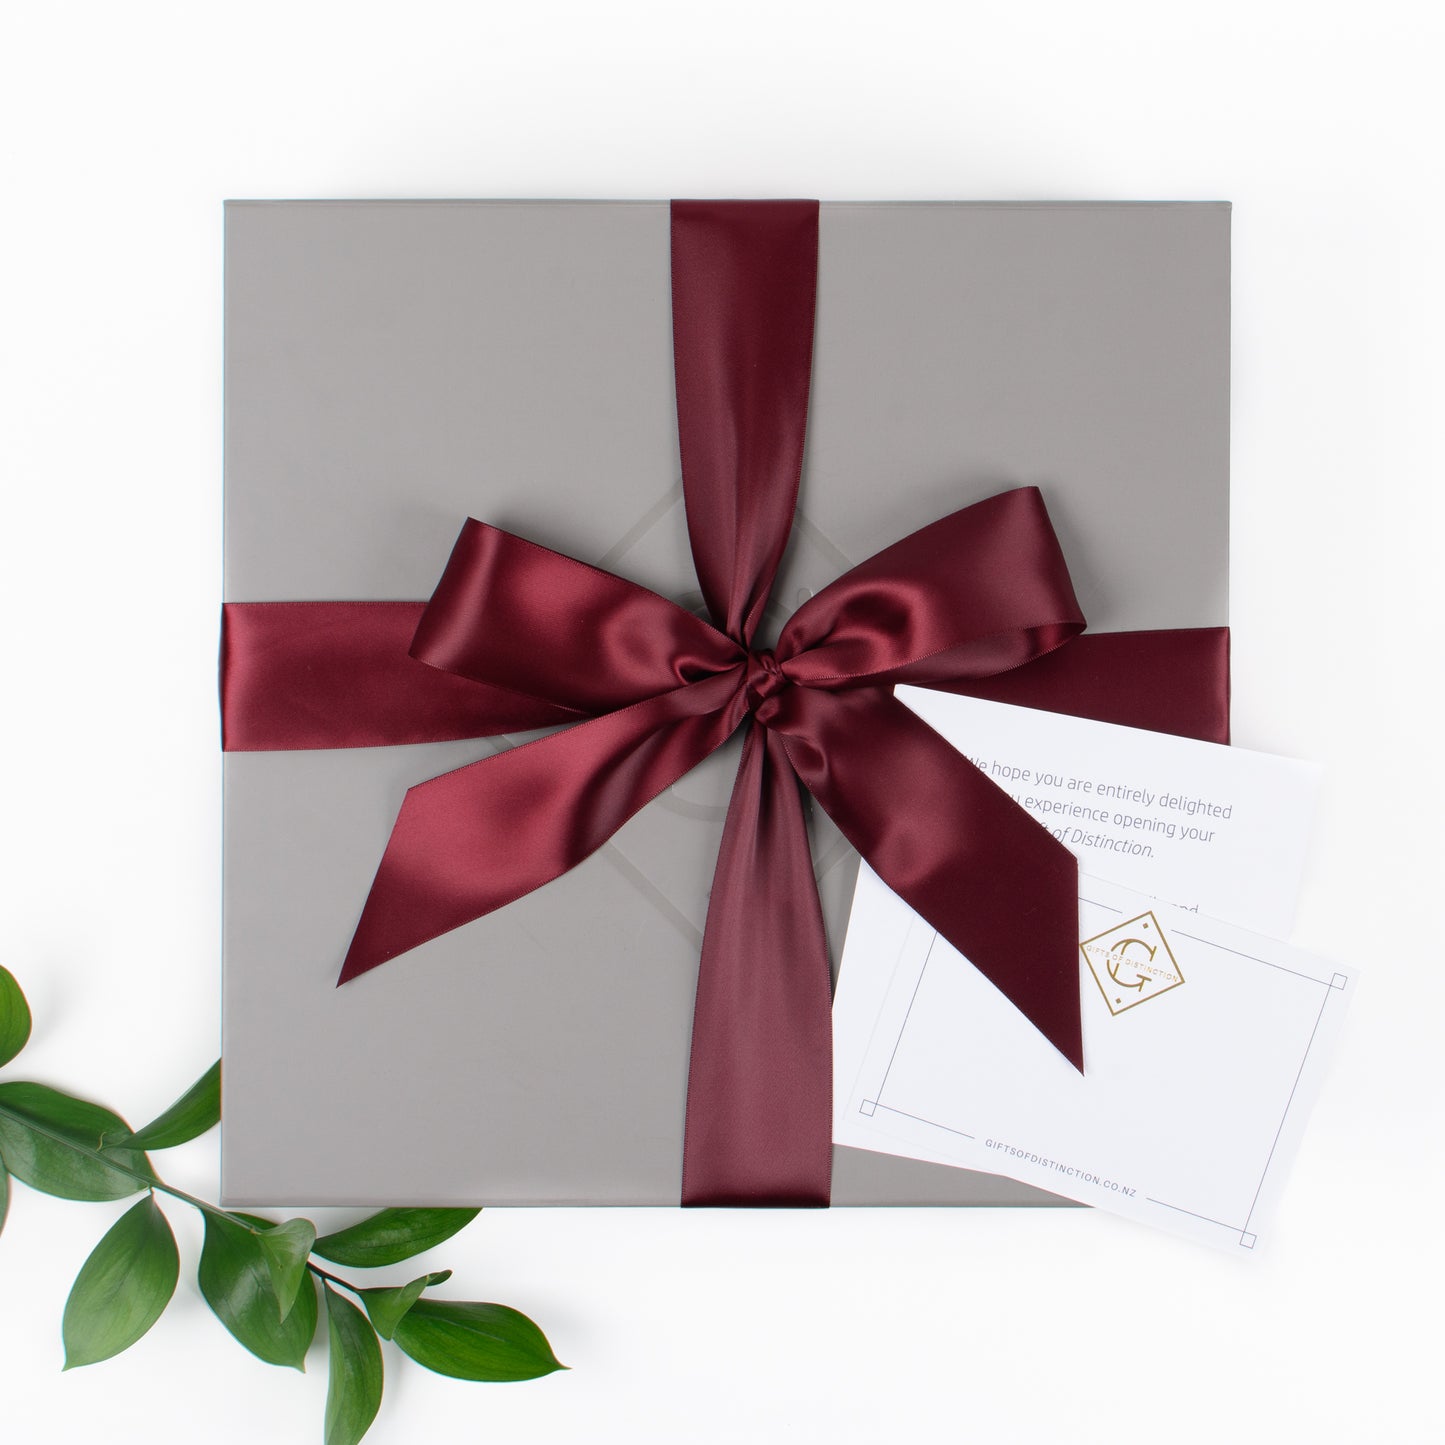 Eco Lovers Elite - Gift Boxes NZ - Gifts of Distinction